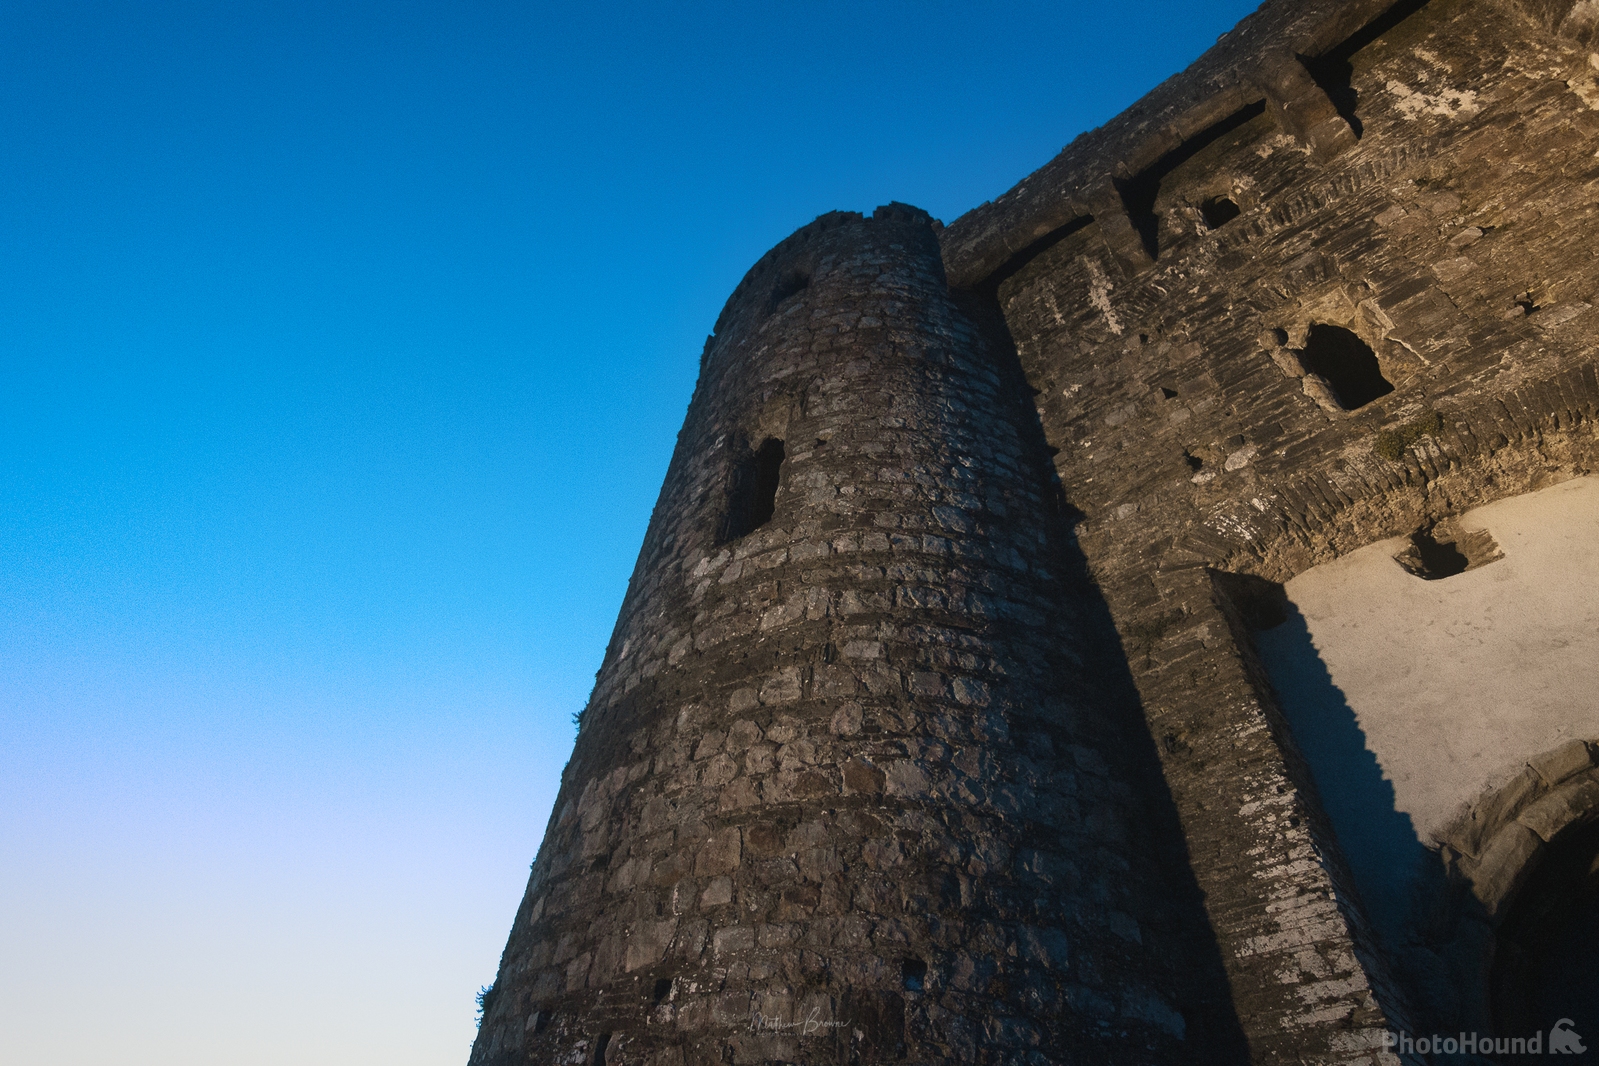 Image of Kidwelly Castle by Mathew Browne